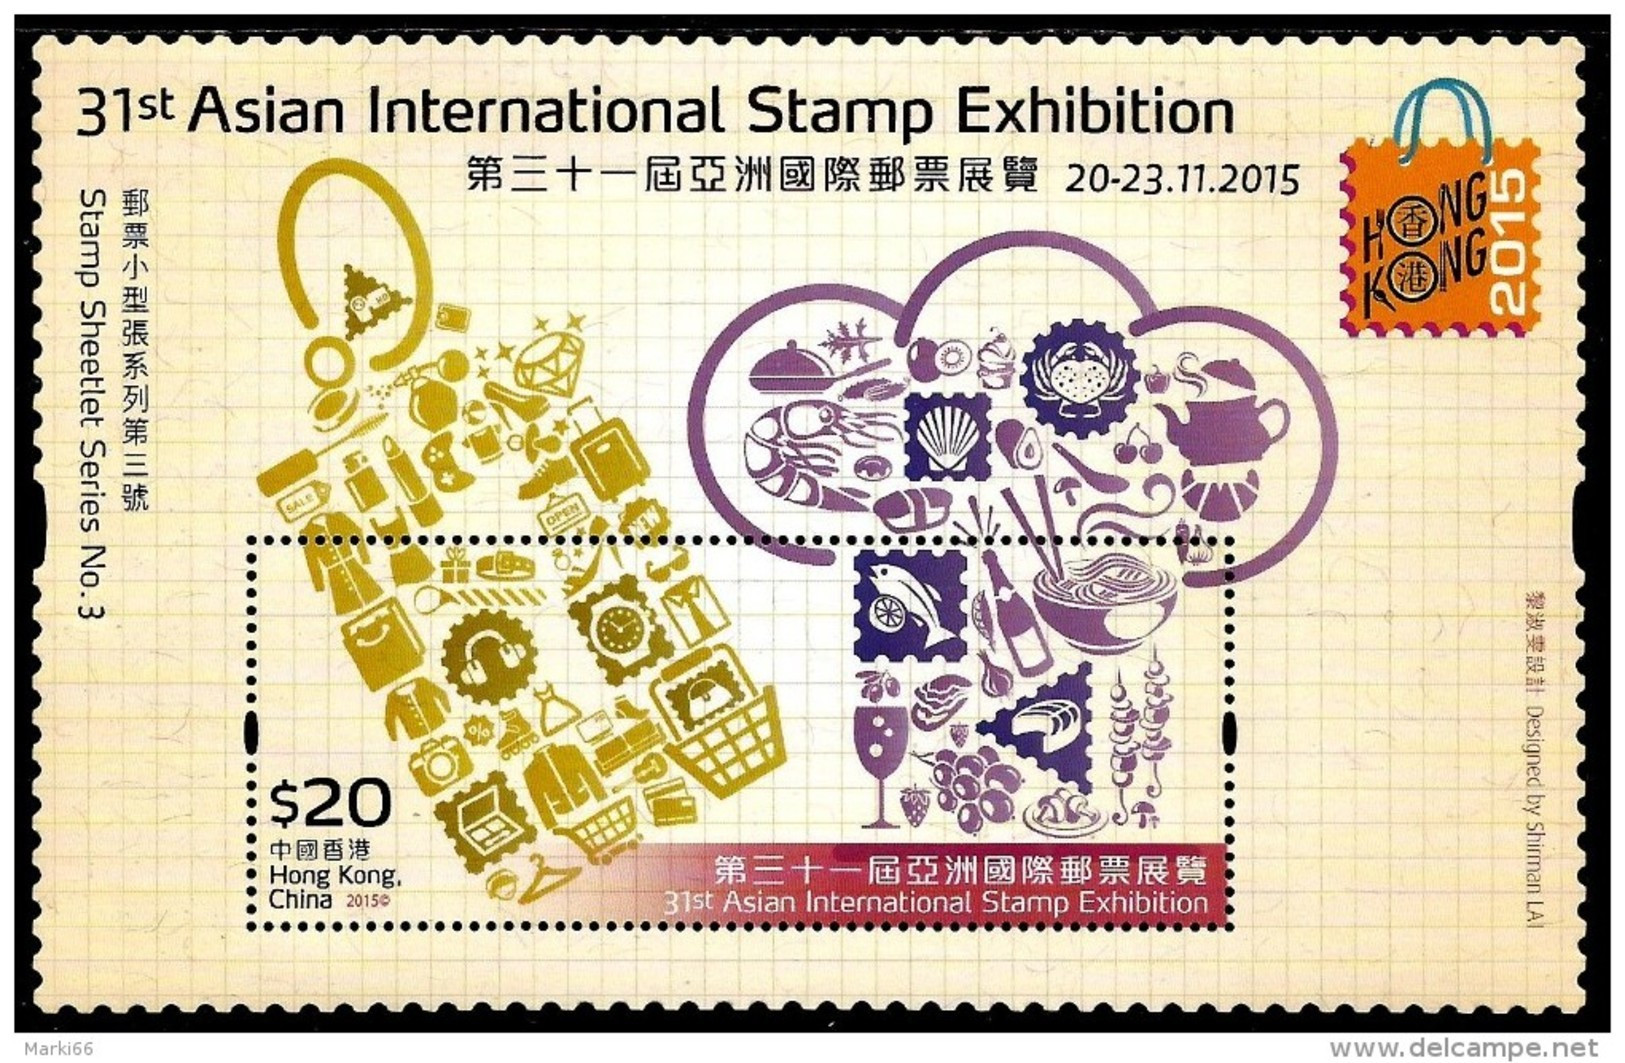 Hong Kong - 2015 - Asian International Stamp Exhibition, Series No. 3 - Mint Souvenir Sheet With Hot Foil Imprint - Unused Stamps